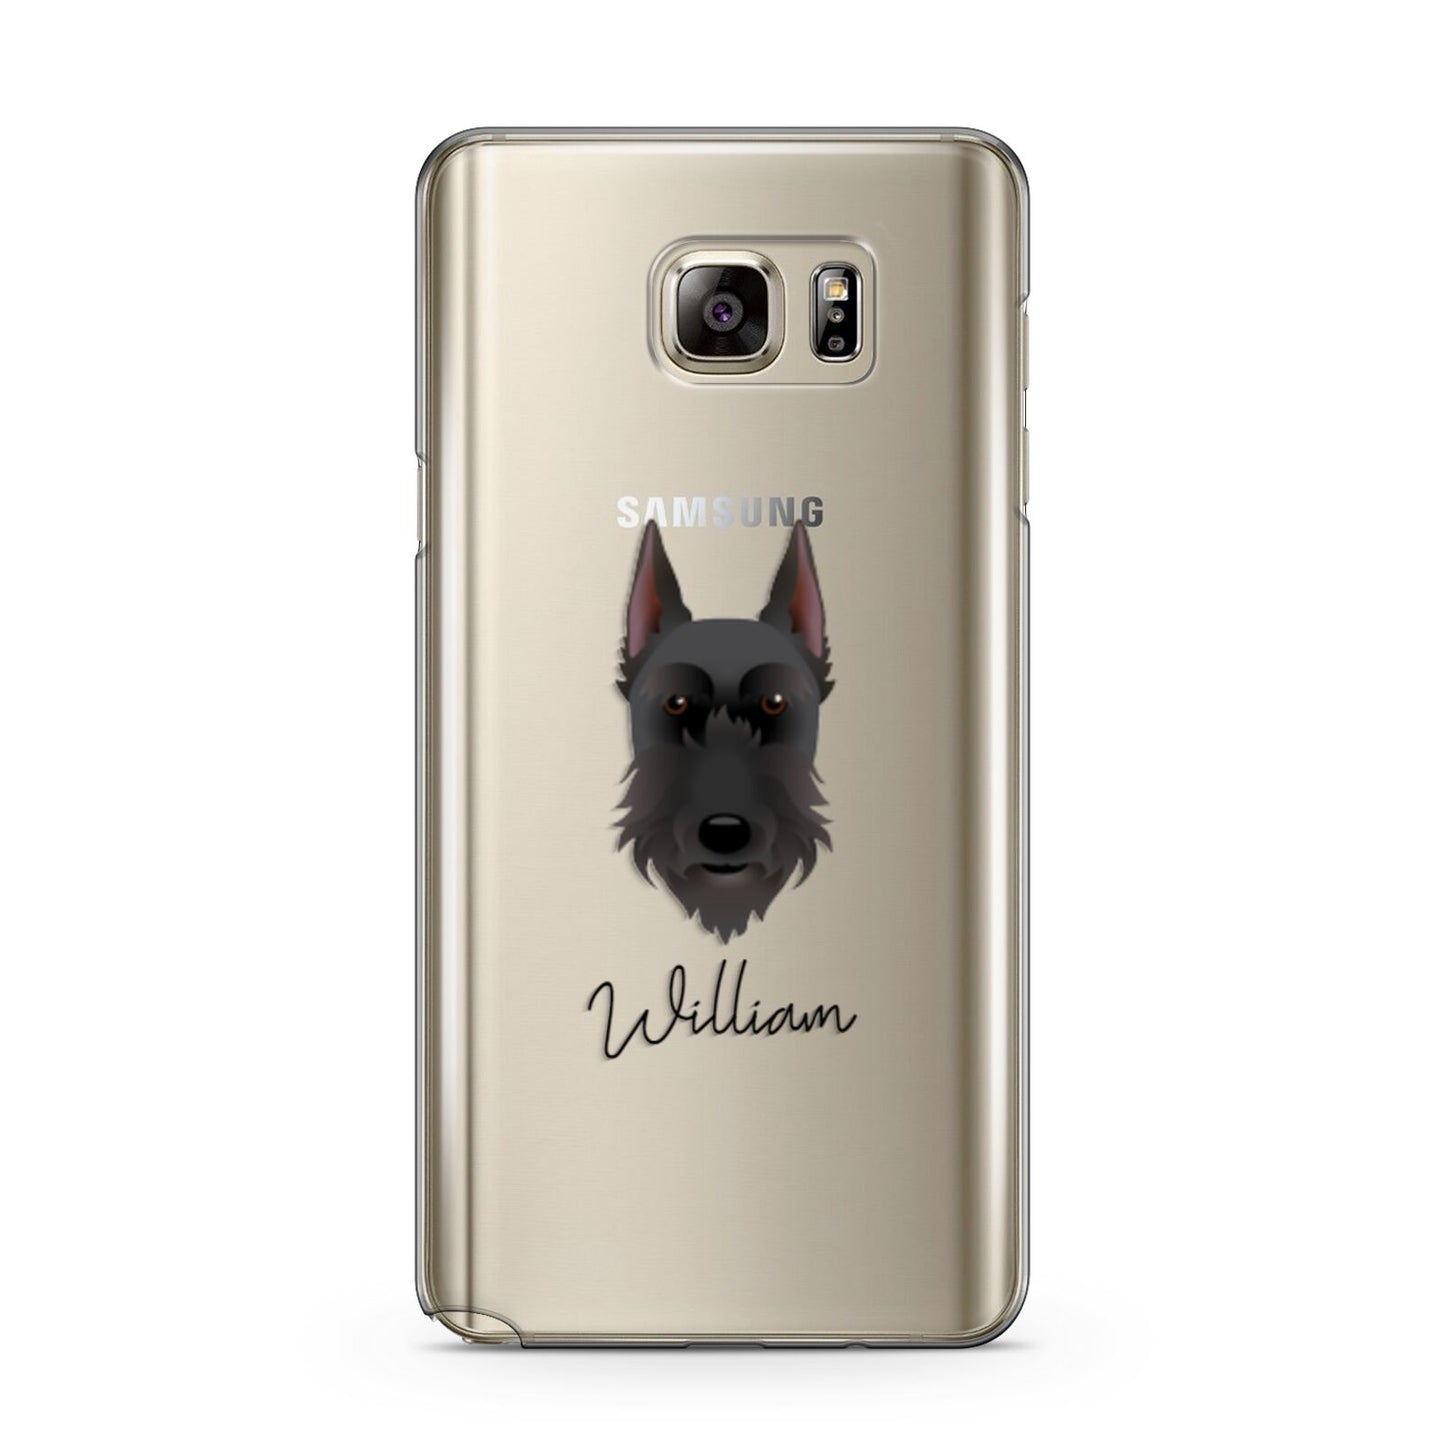 Giant Schnauzer Personalised Samsung Galaxy Note 5 Case